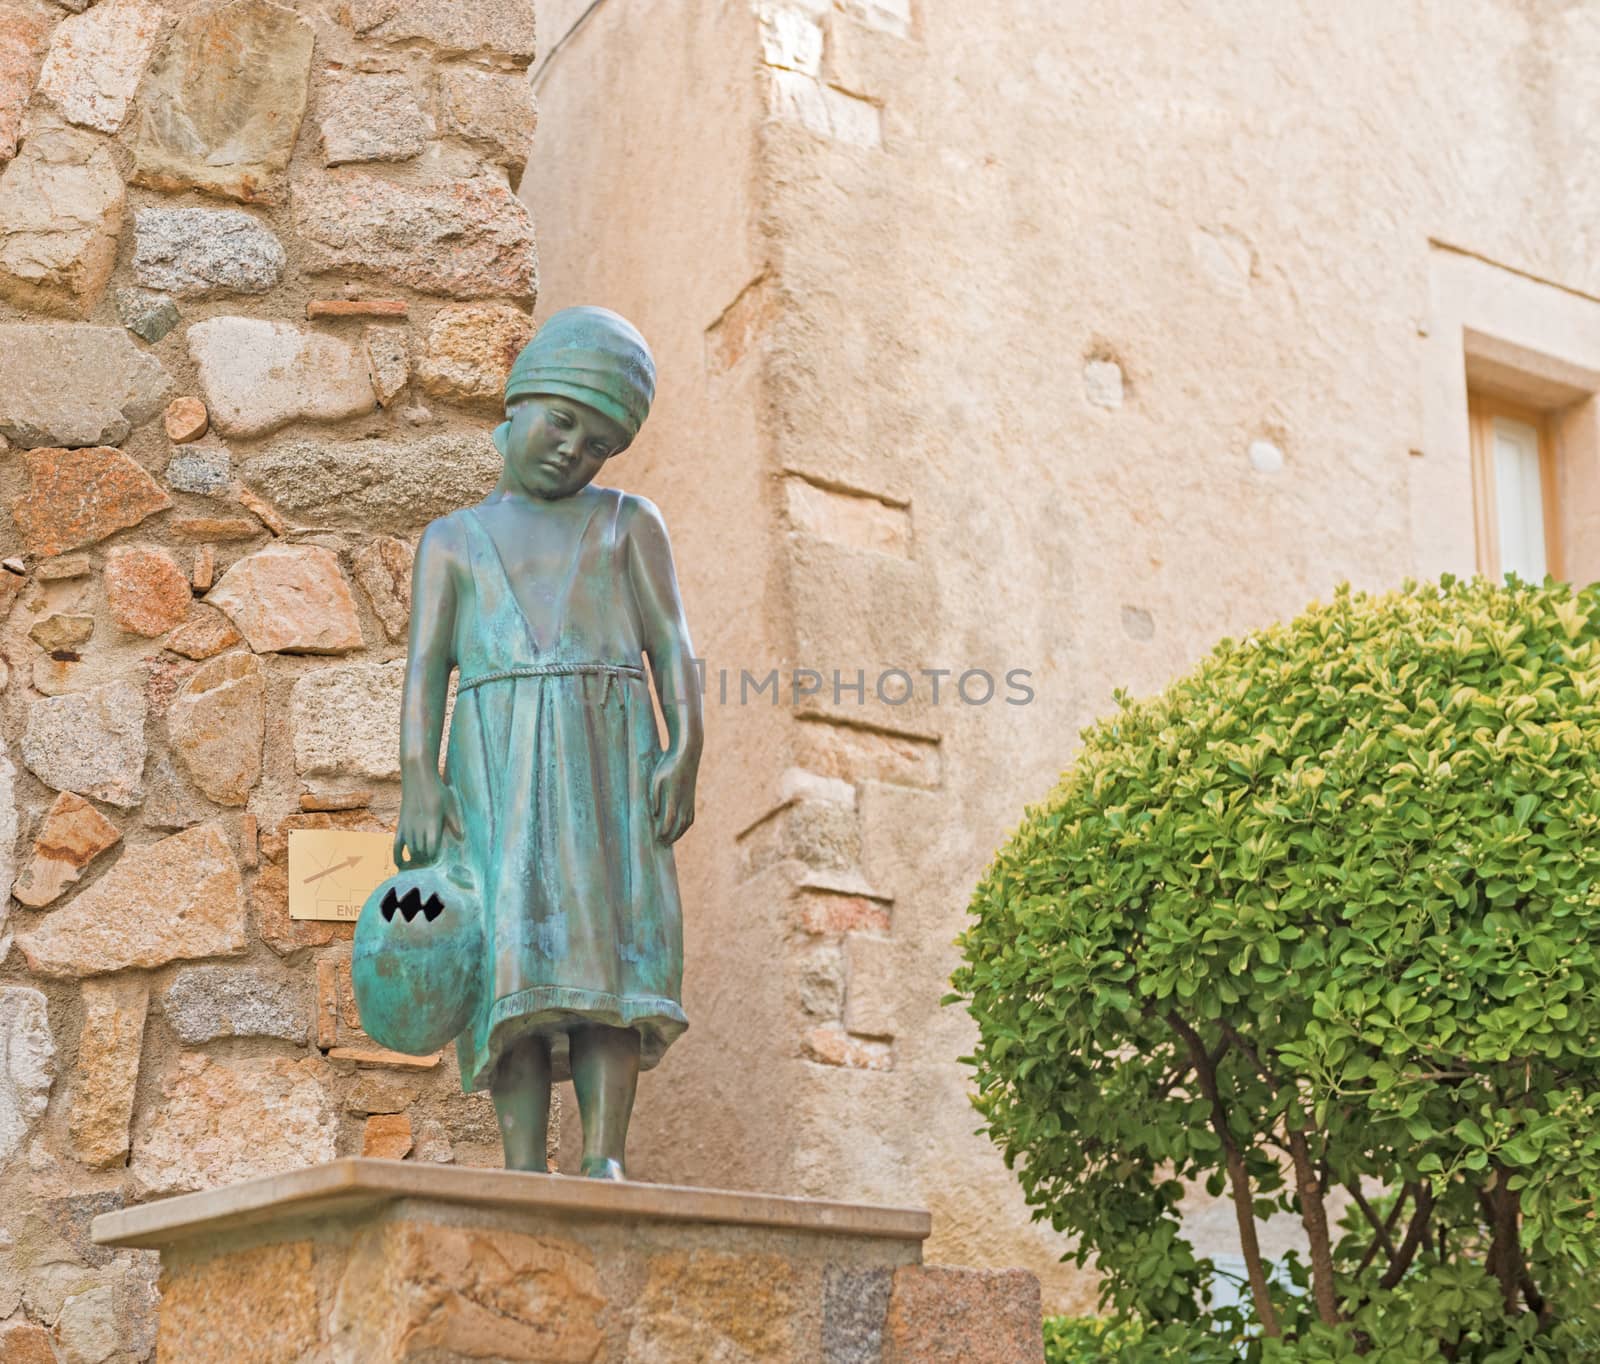 Girl statue in Tossa de Mar medievaltown in Catalonia, Spain by Marcus